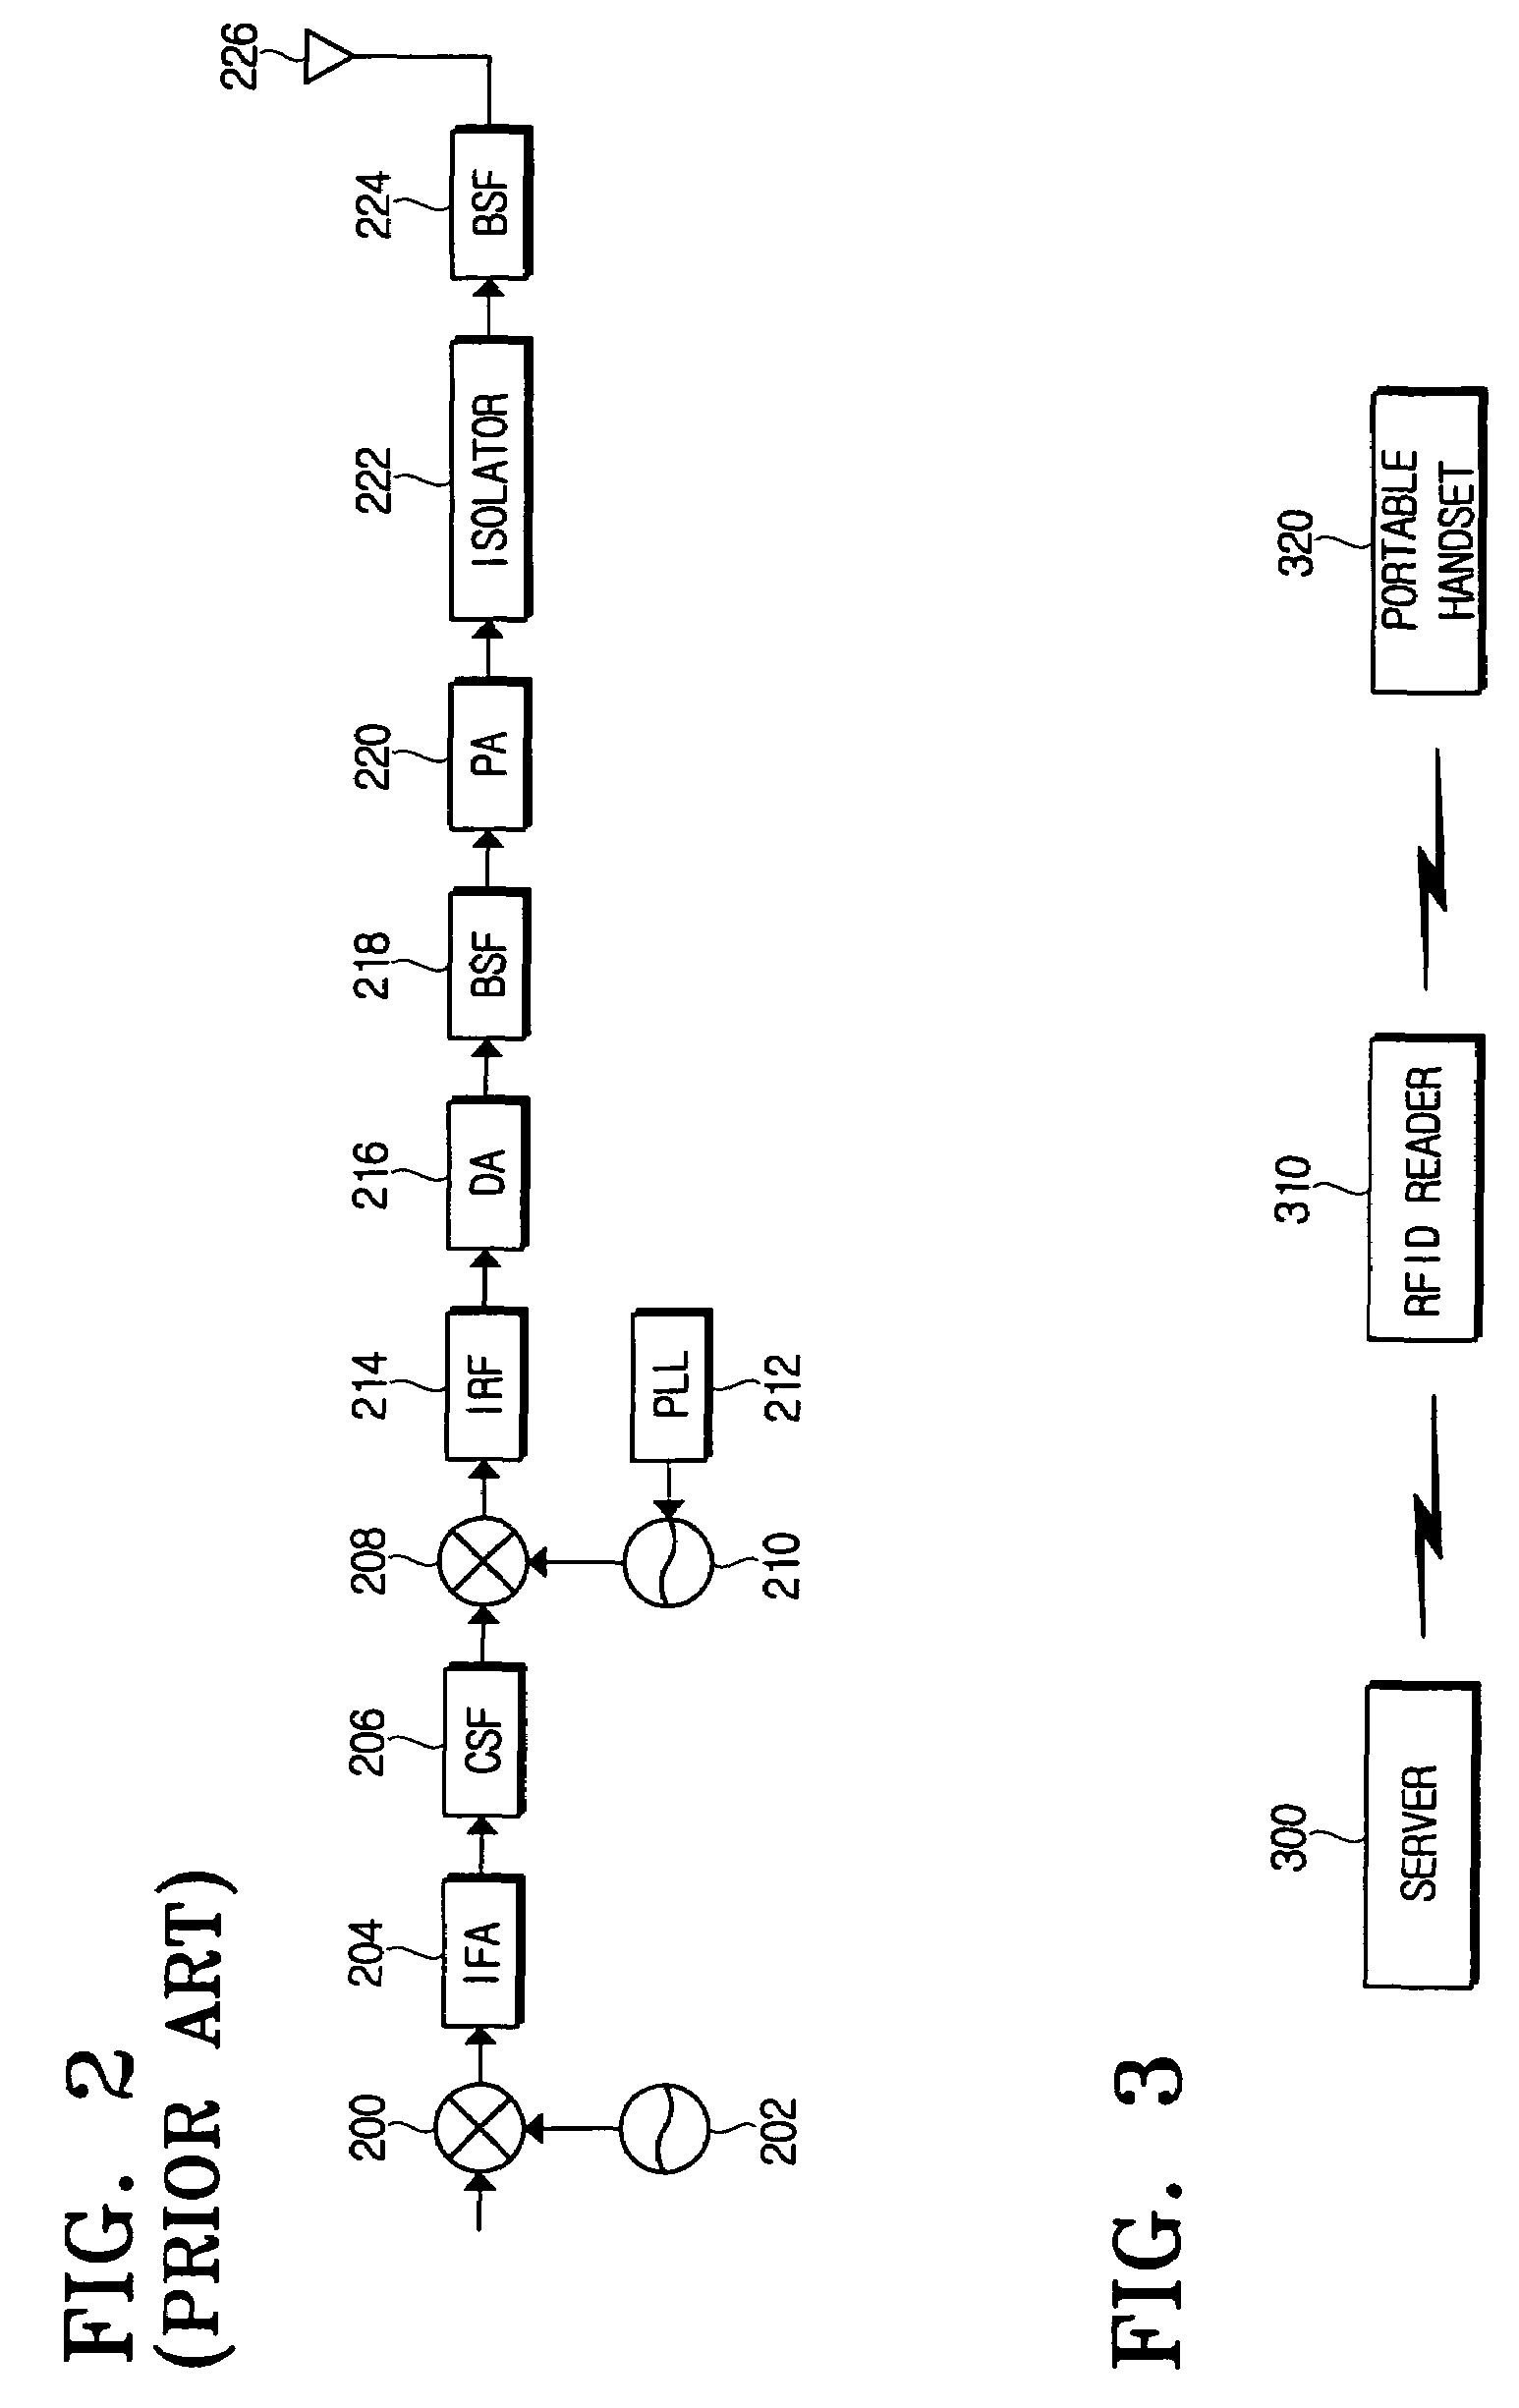 Portable handset having a radio frequency identification(RFID) function and method using the same